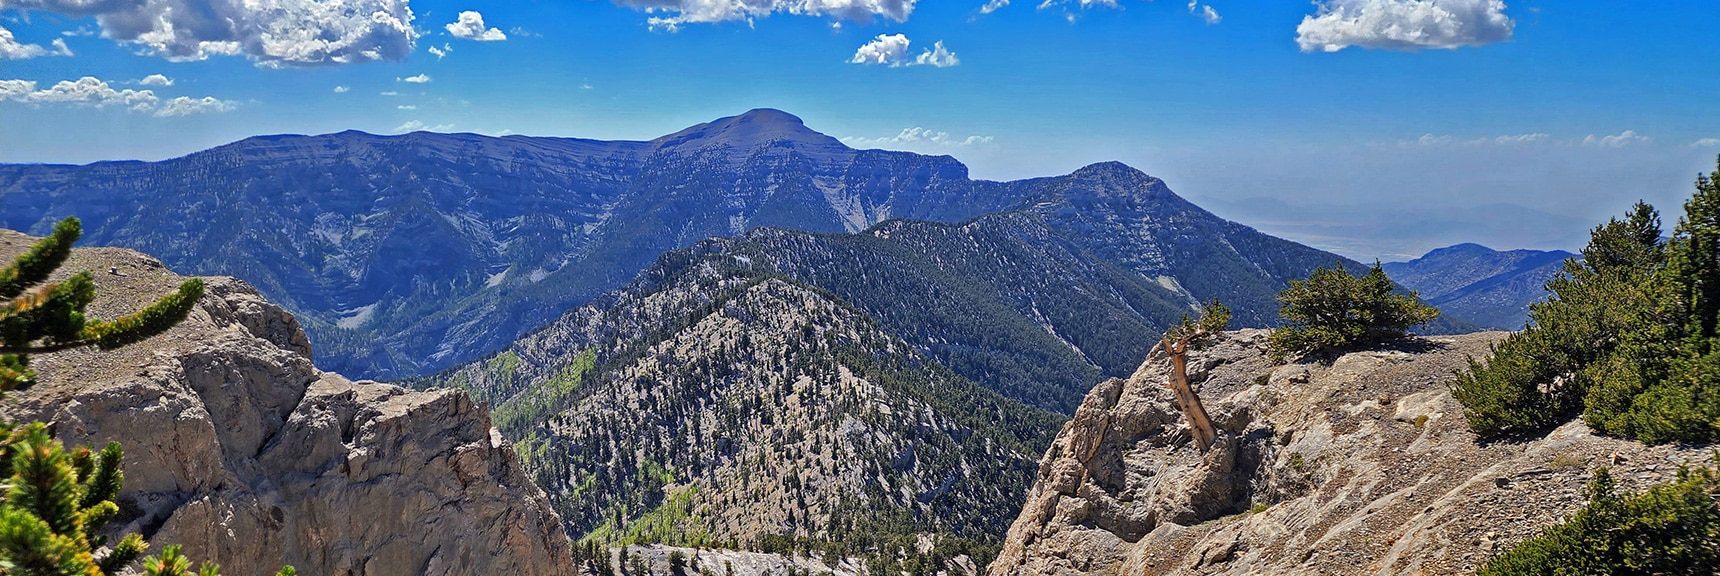 Great View of Entire Lee/Kyle Canyon Upper Ridgeline Between Mummy Mountain and Lee Peak. Charleston Peak Center | Mummy Mountain Grand Crossing | Lee Canyon to Deer Creek Road | Mt Charleston Wilderness | Spring Mountains, Nevada |